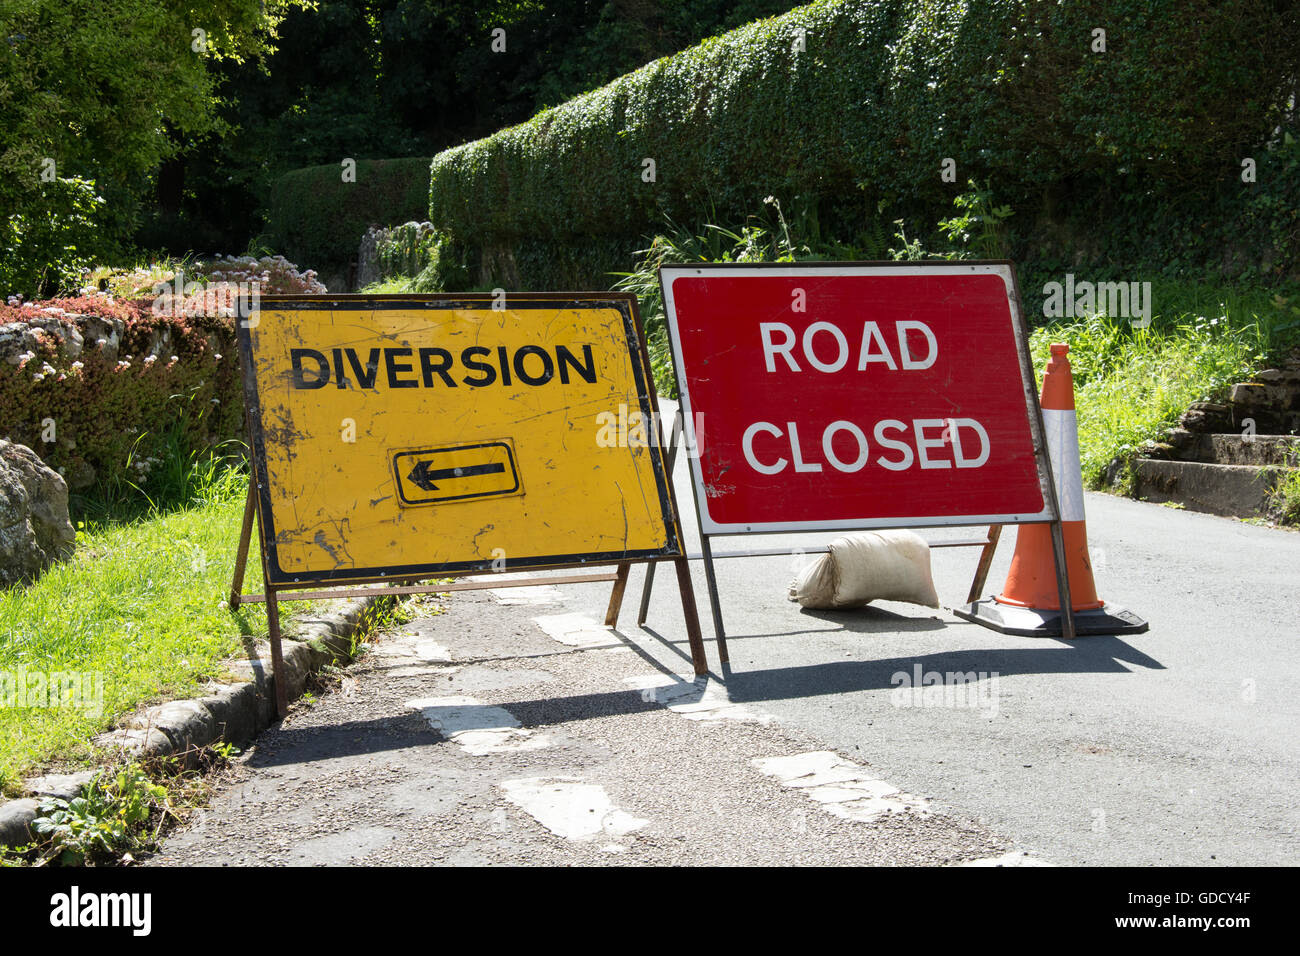 Road signs in the UK Stock Photo